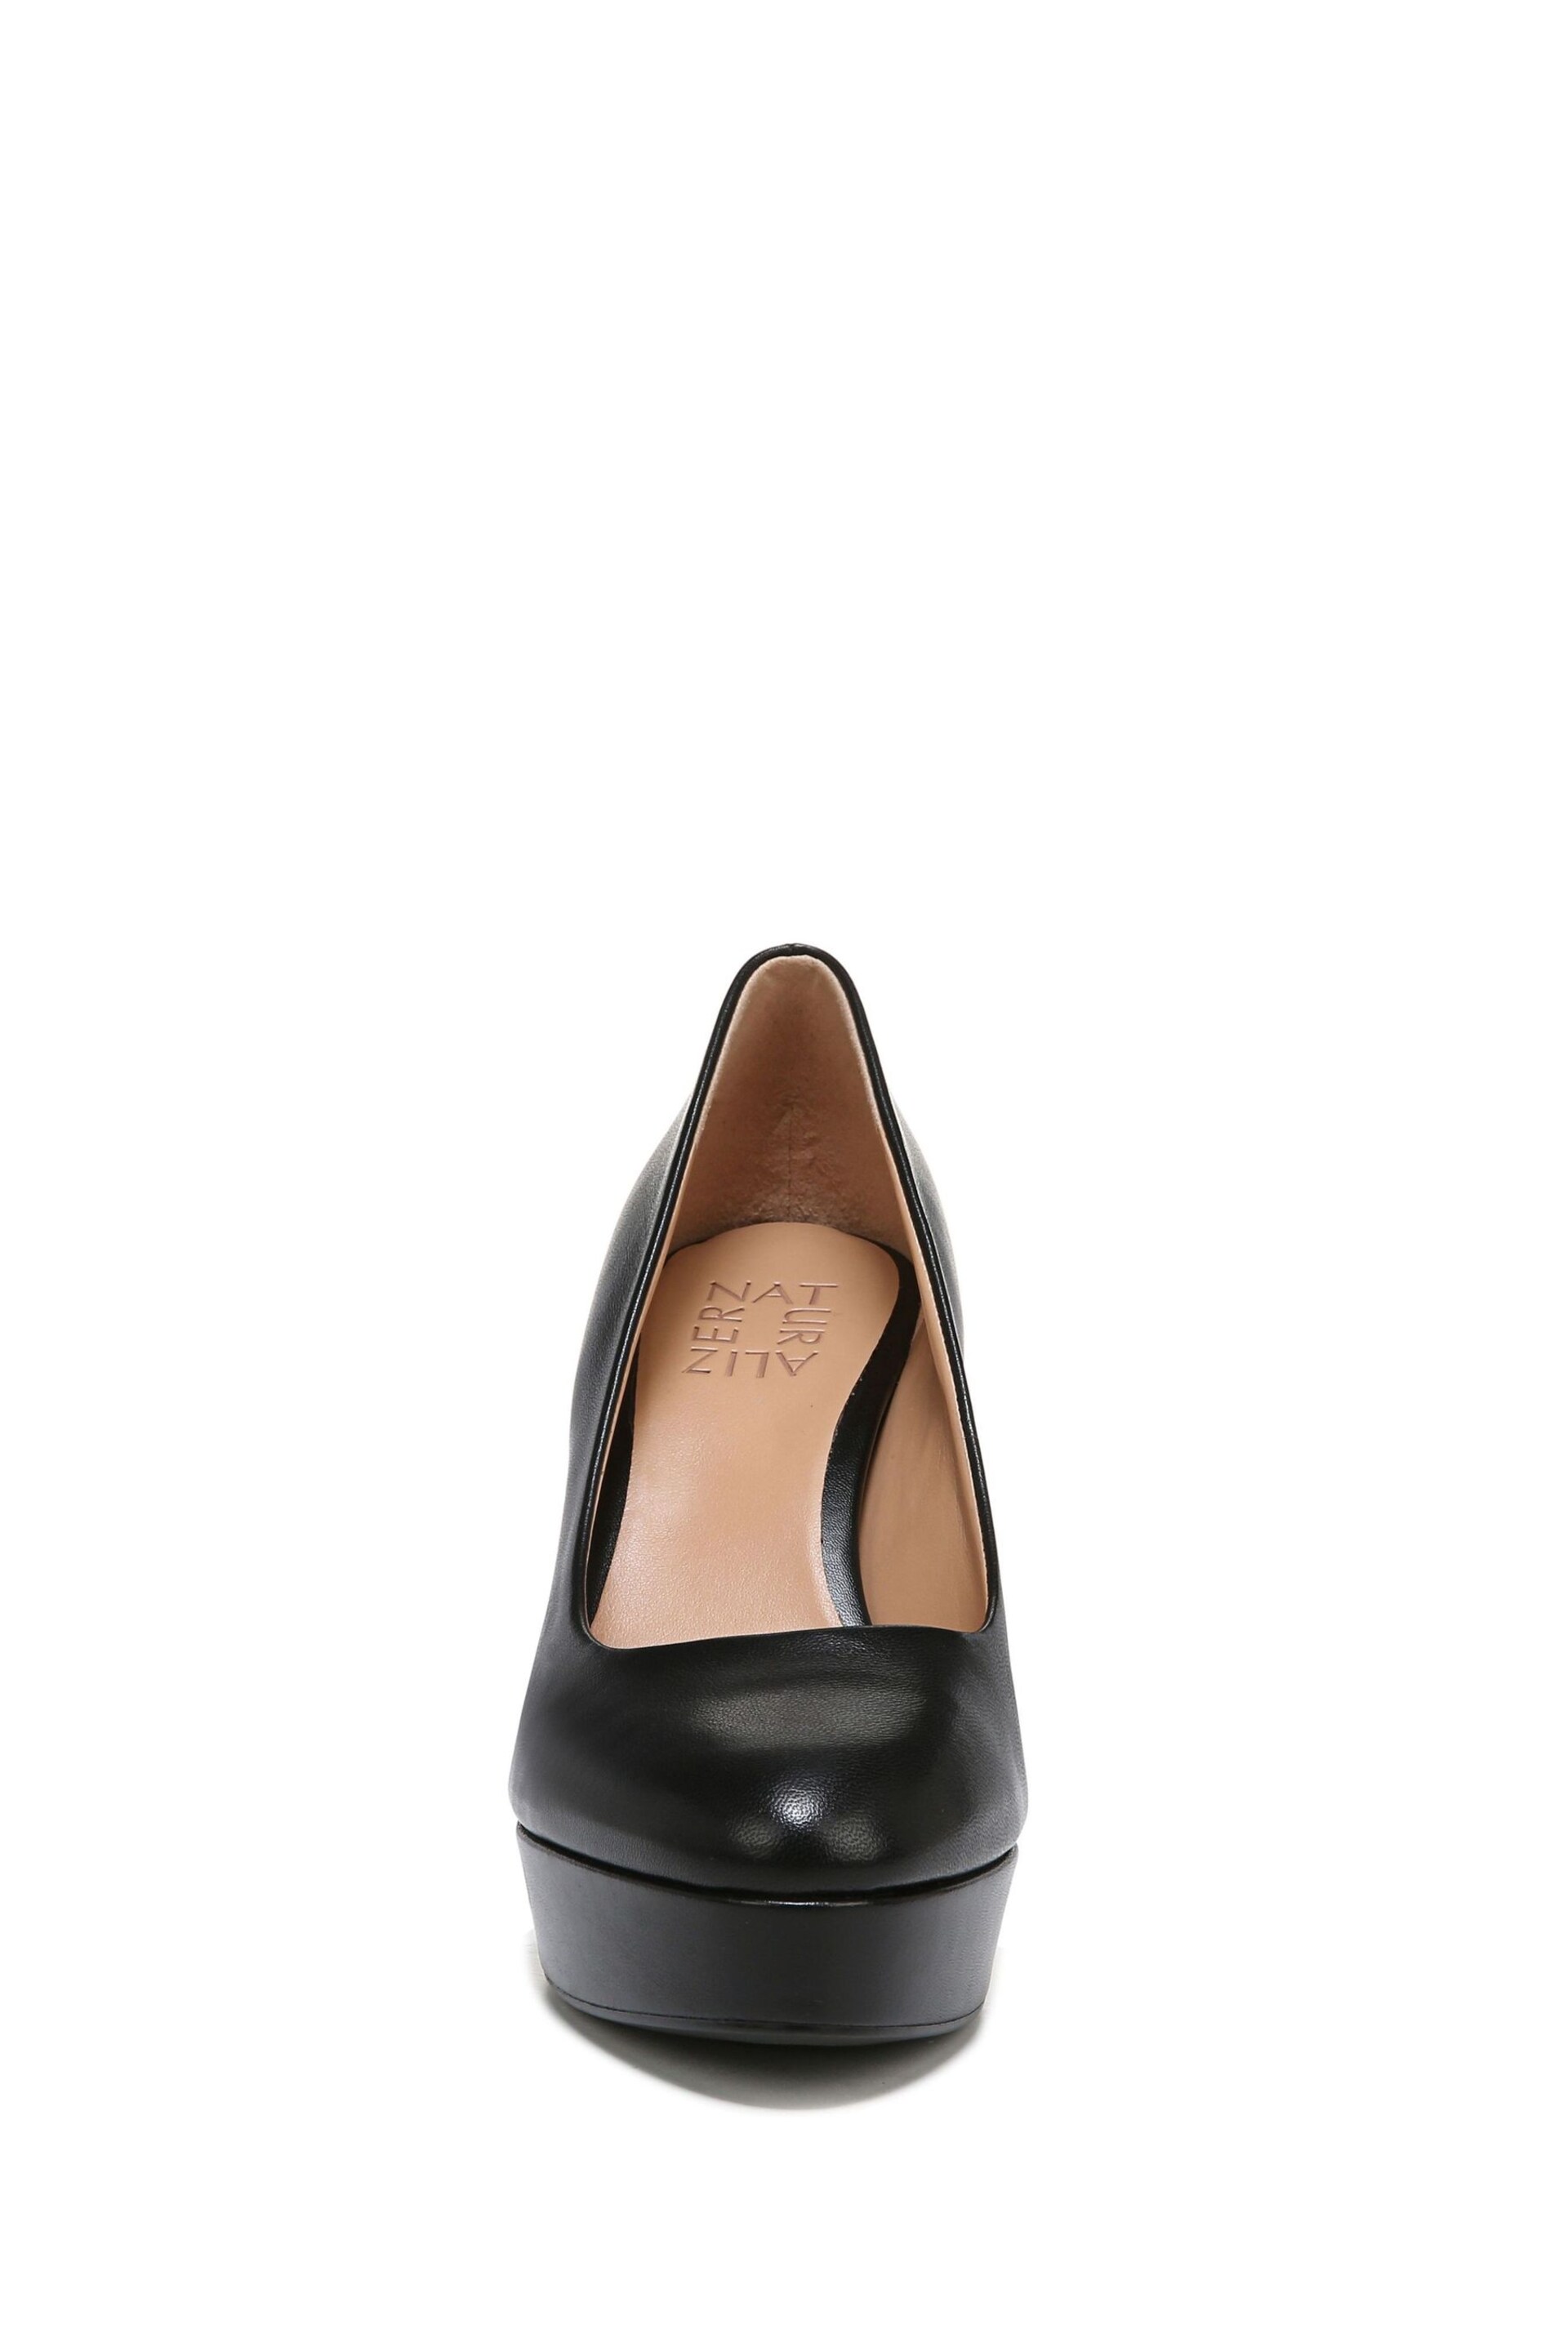 Naturalizer Court Leather Black Shoes - Image 4 of 7